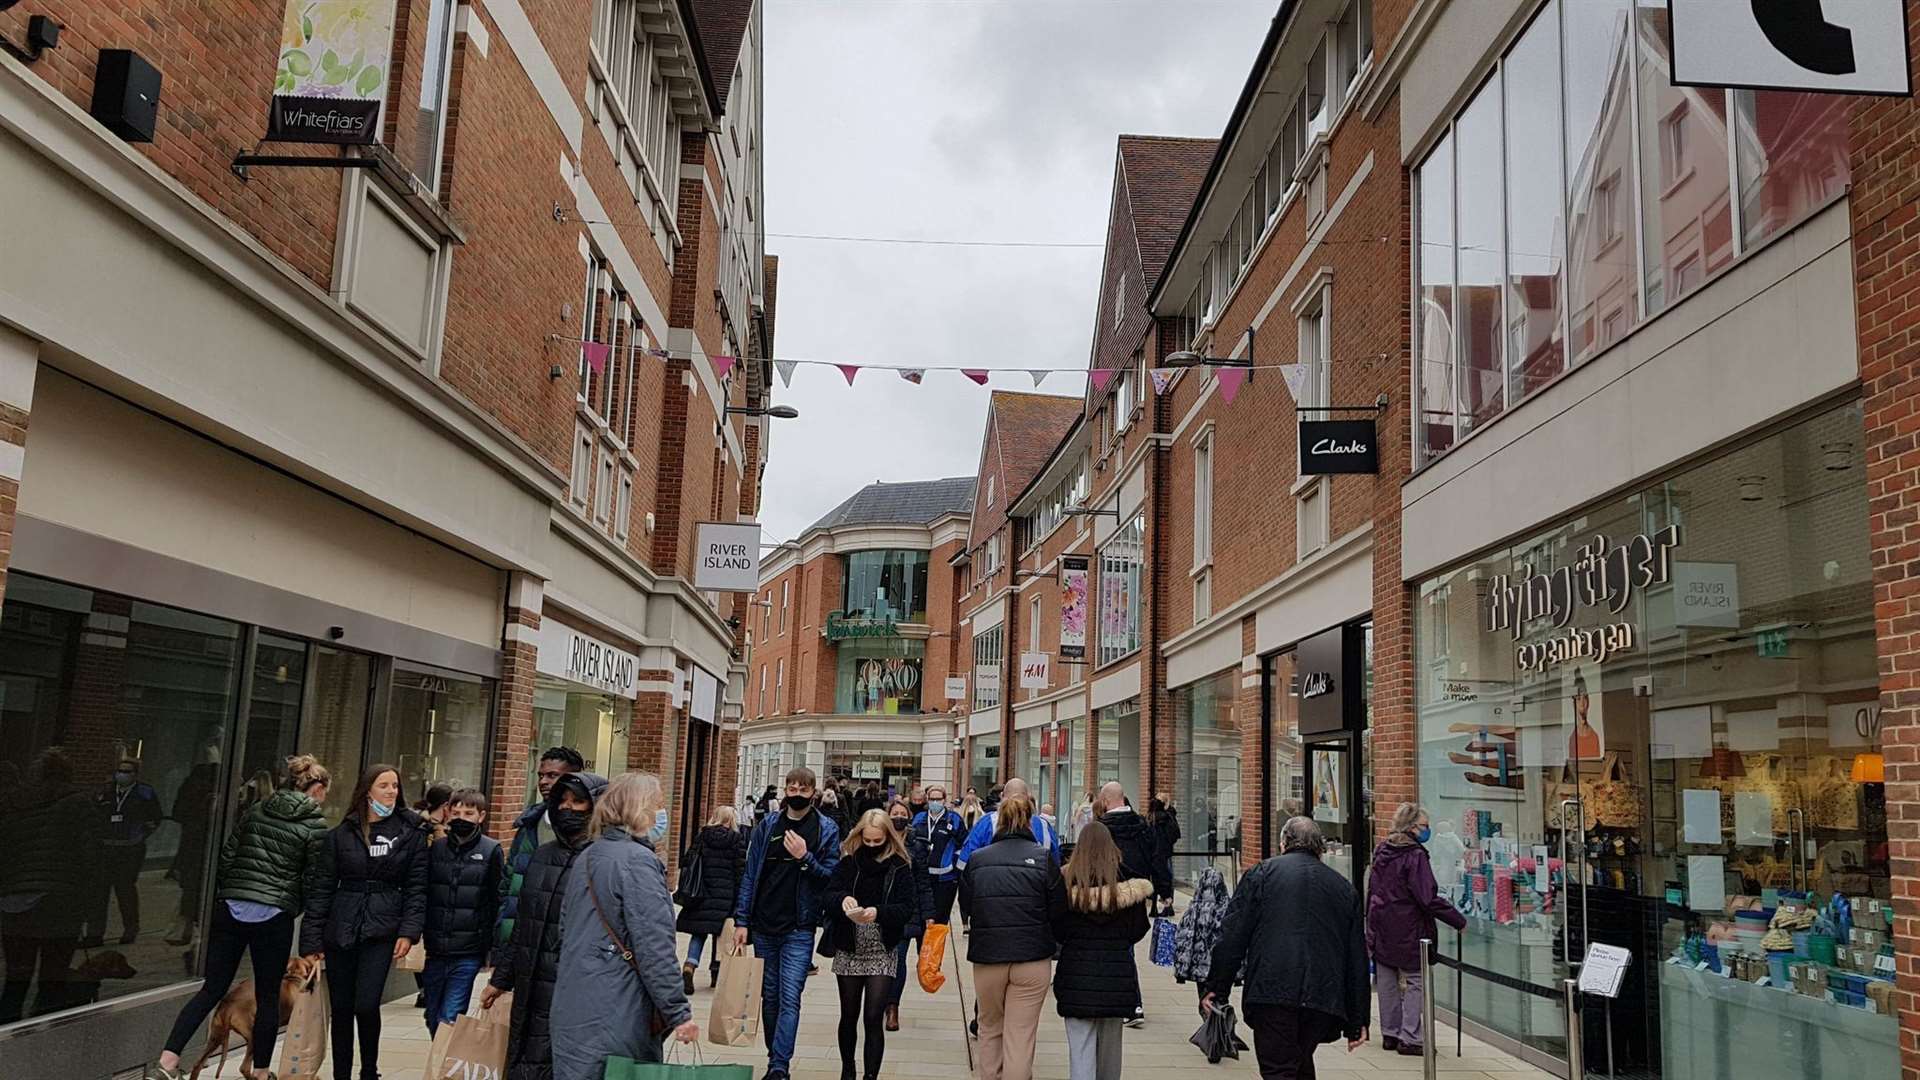 Whitefriars will be open for much of the festive season